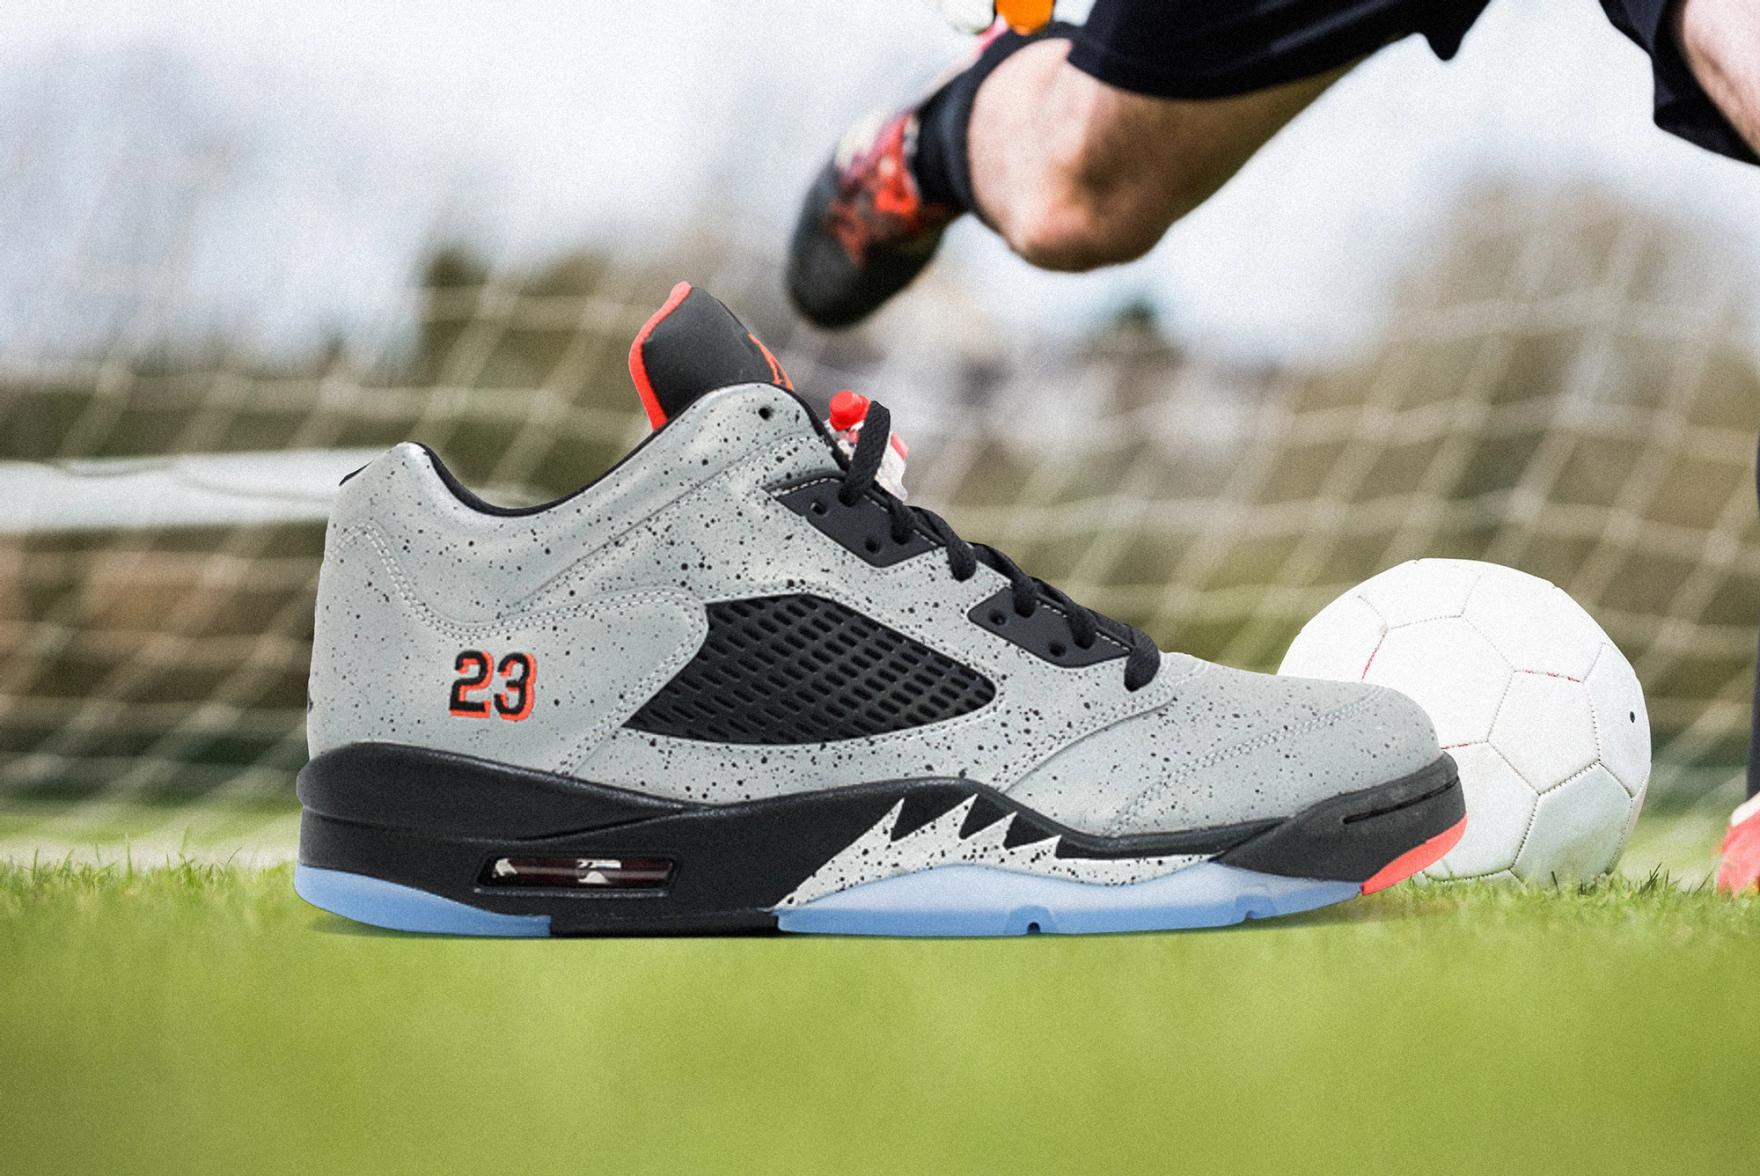 The Best Soccer-Inspired Sneakers